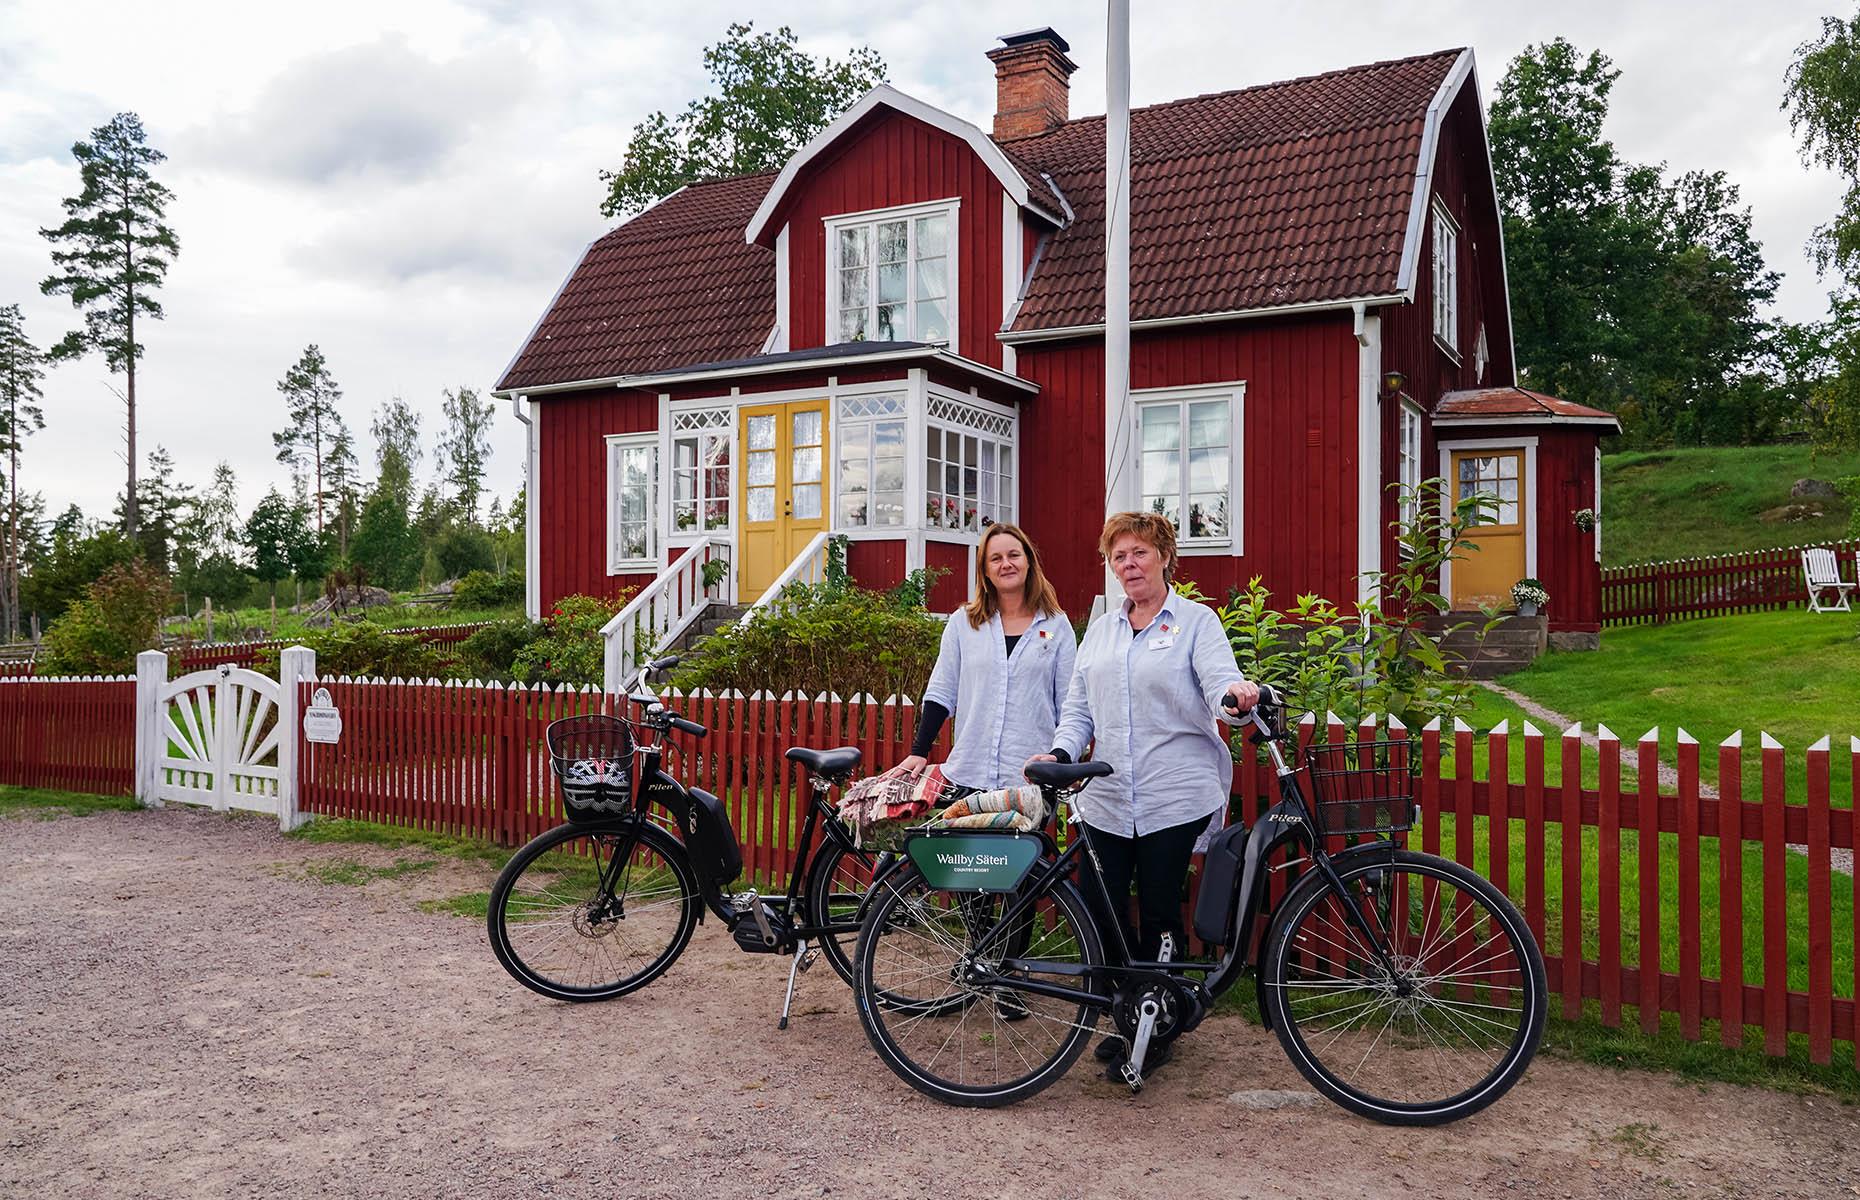 <p>Astrid Lindgren’s books have such an intense sense of place that many of the movies made of her books were filmed in the real places she set them in. <a href="https://cyklaifilmlandskapetsmaland.se/?lang=en#/">Cykla I Filmlandskapet</a> runs an e-cycle tour through the best-known locations, reliving iconic moments from the films from Bullerbyn (the Noisy Village) to Katthult. You don’t need to be a fan to enjoy the tour. The nine-mile ride takes you through forests and idyllic villages, past red cottages and glittering lakes, before finishing at the picture-postcard farm in Katthult. There you'll enjoy 'fika' (a moment of peace enjoyed with coffee and cake) at a long wooden table in the orchard.</p>